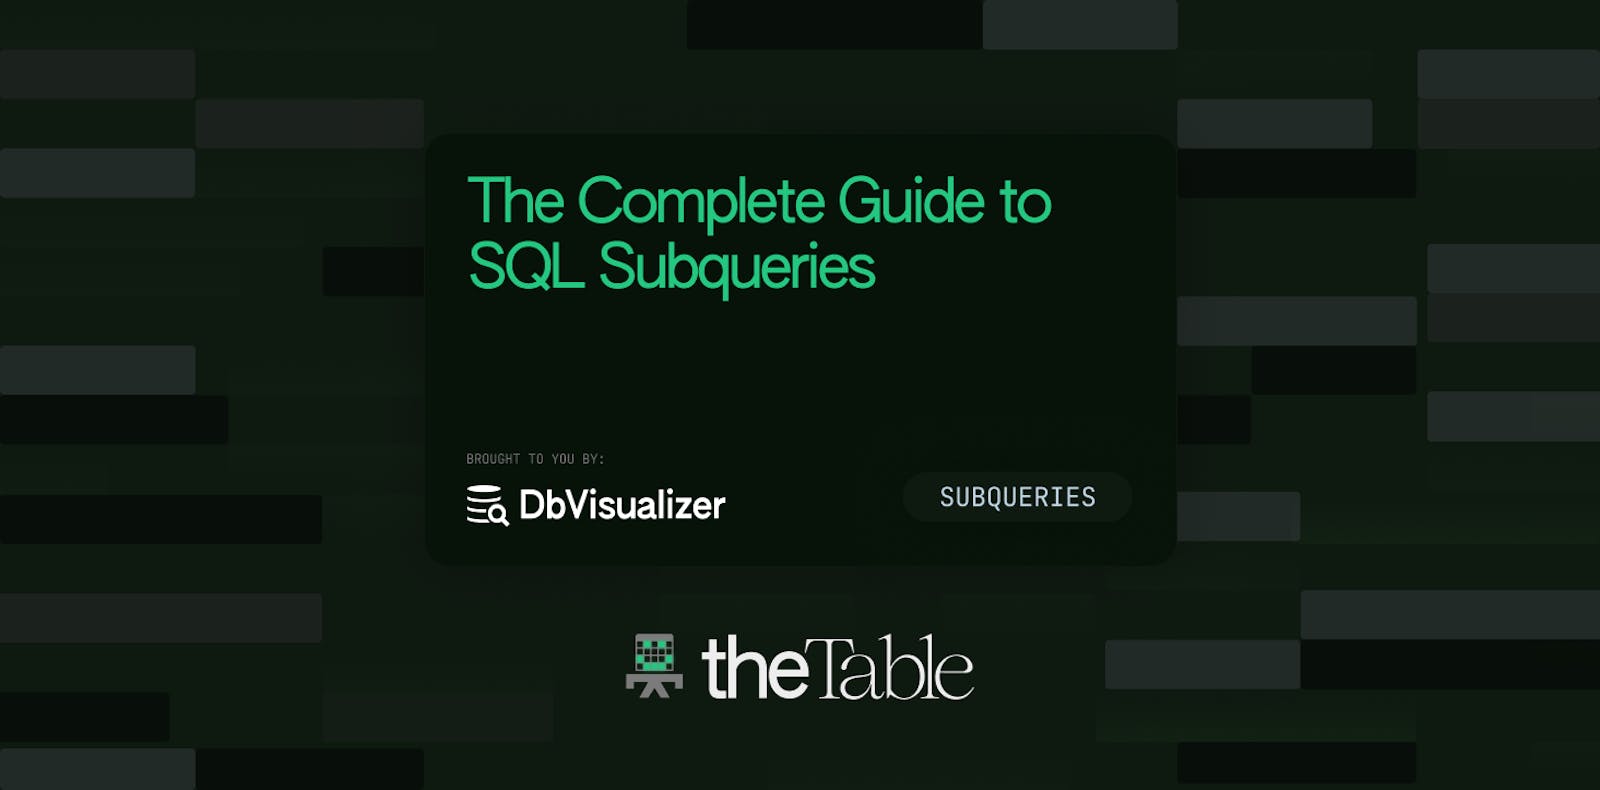 The Complete Guide to SQL Subqueries